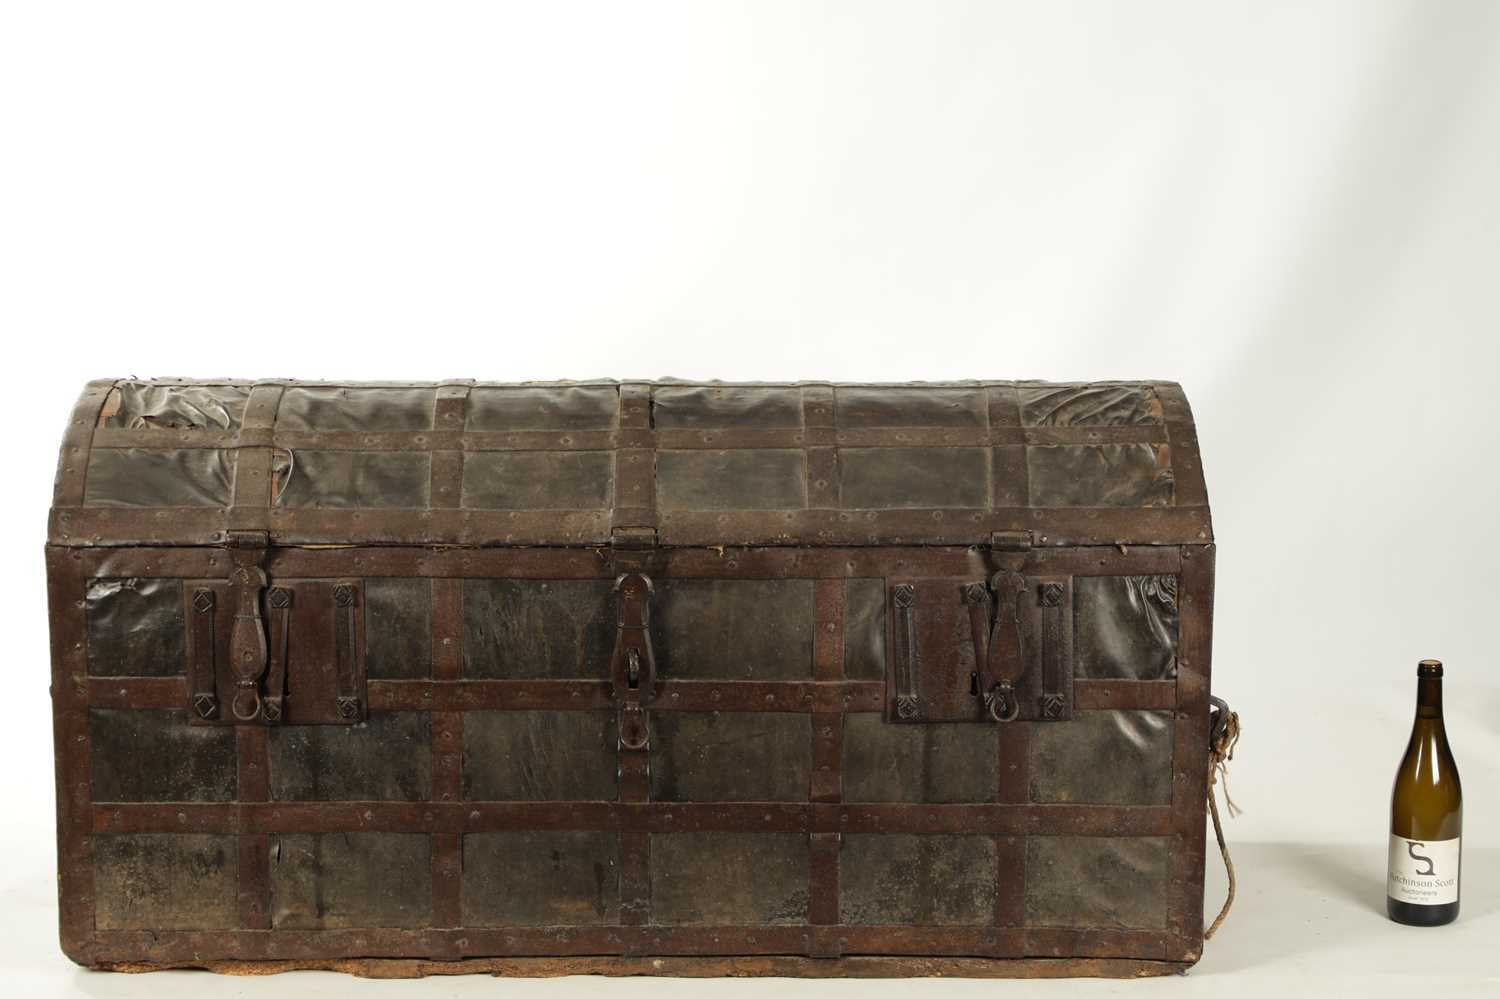 A RARE 17TH CENTURY DOMED TOP IRON BOUND LEATHER COVERED COFFER - Image 6 of 8